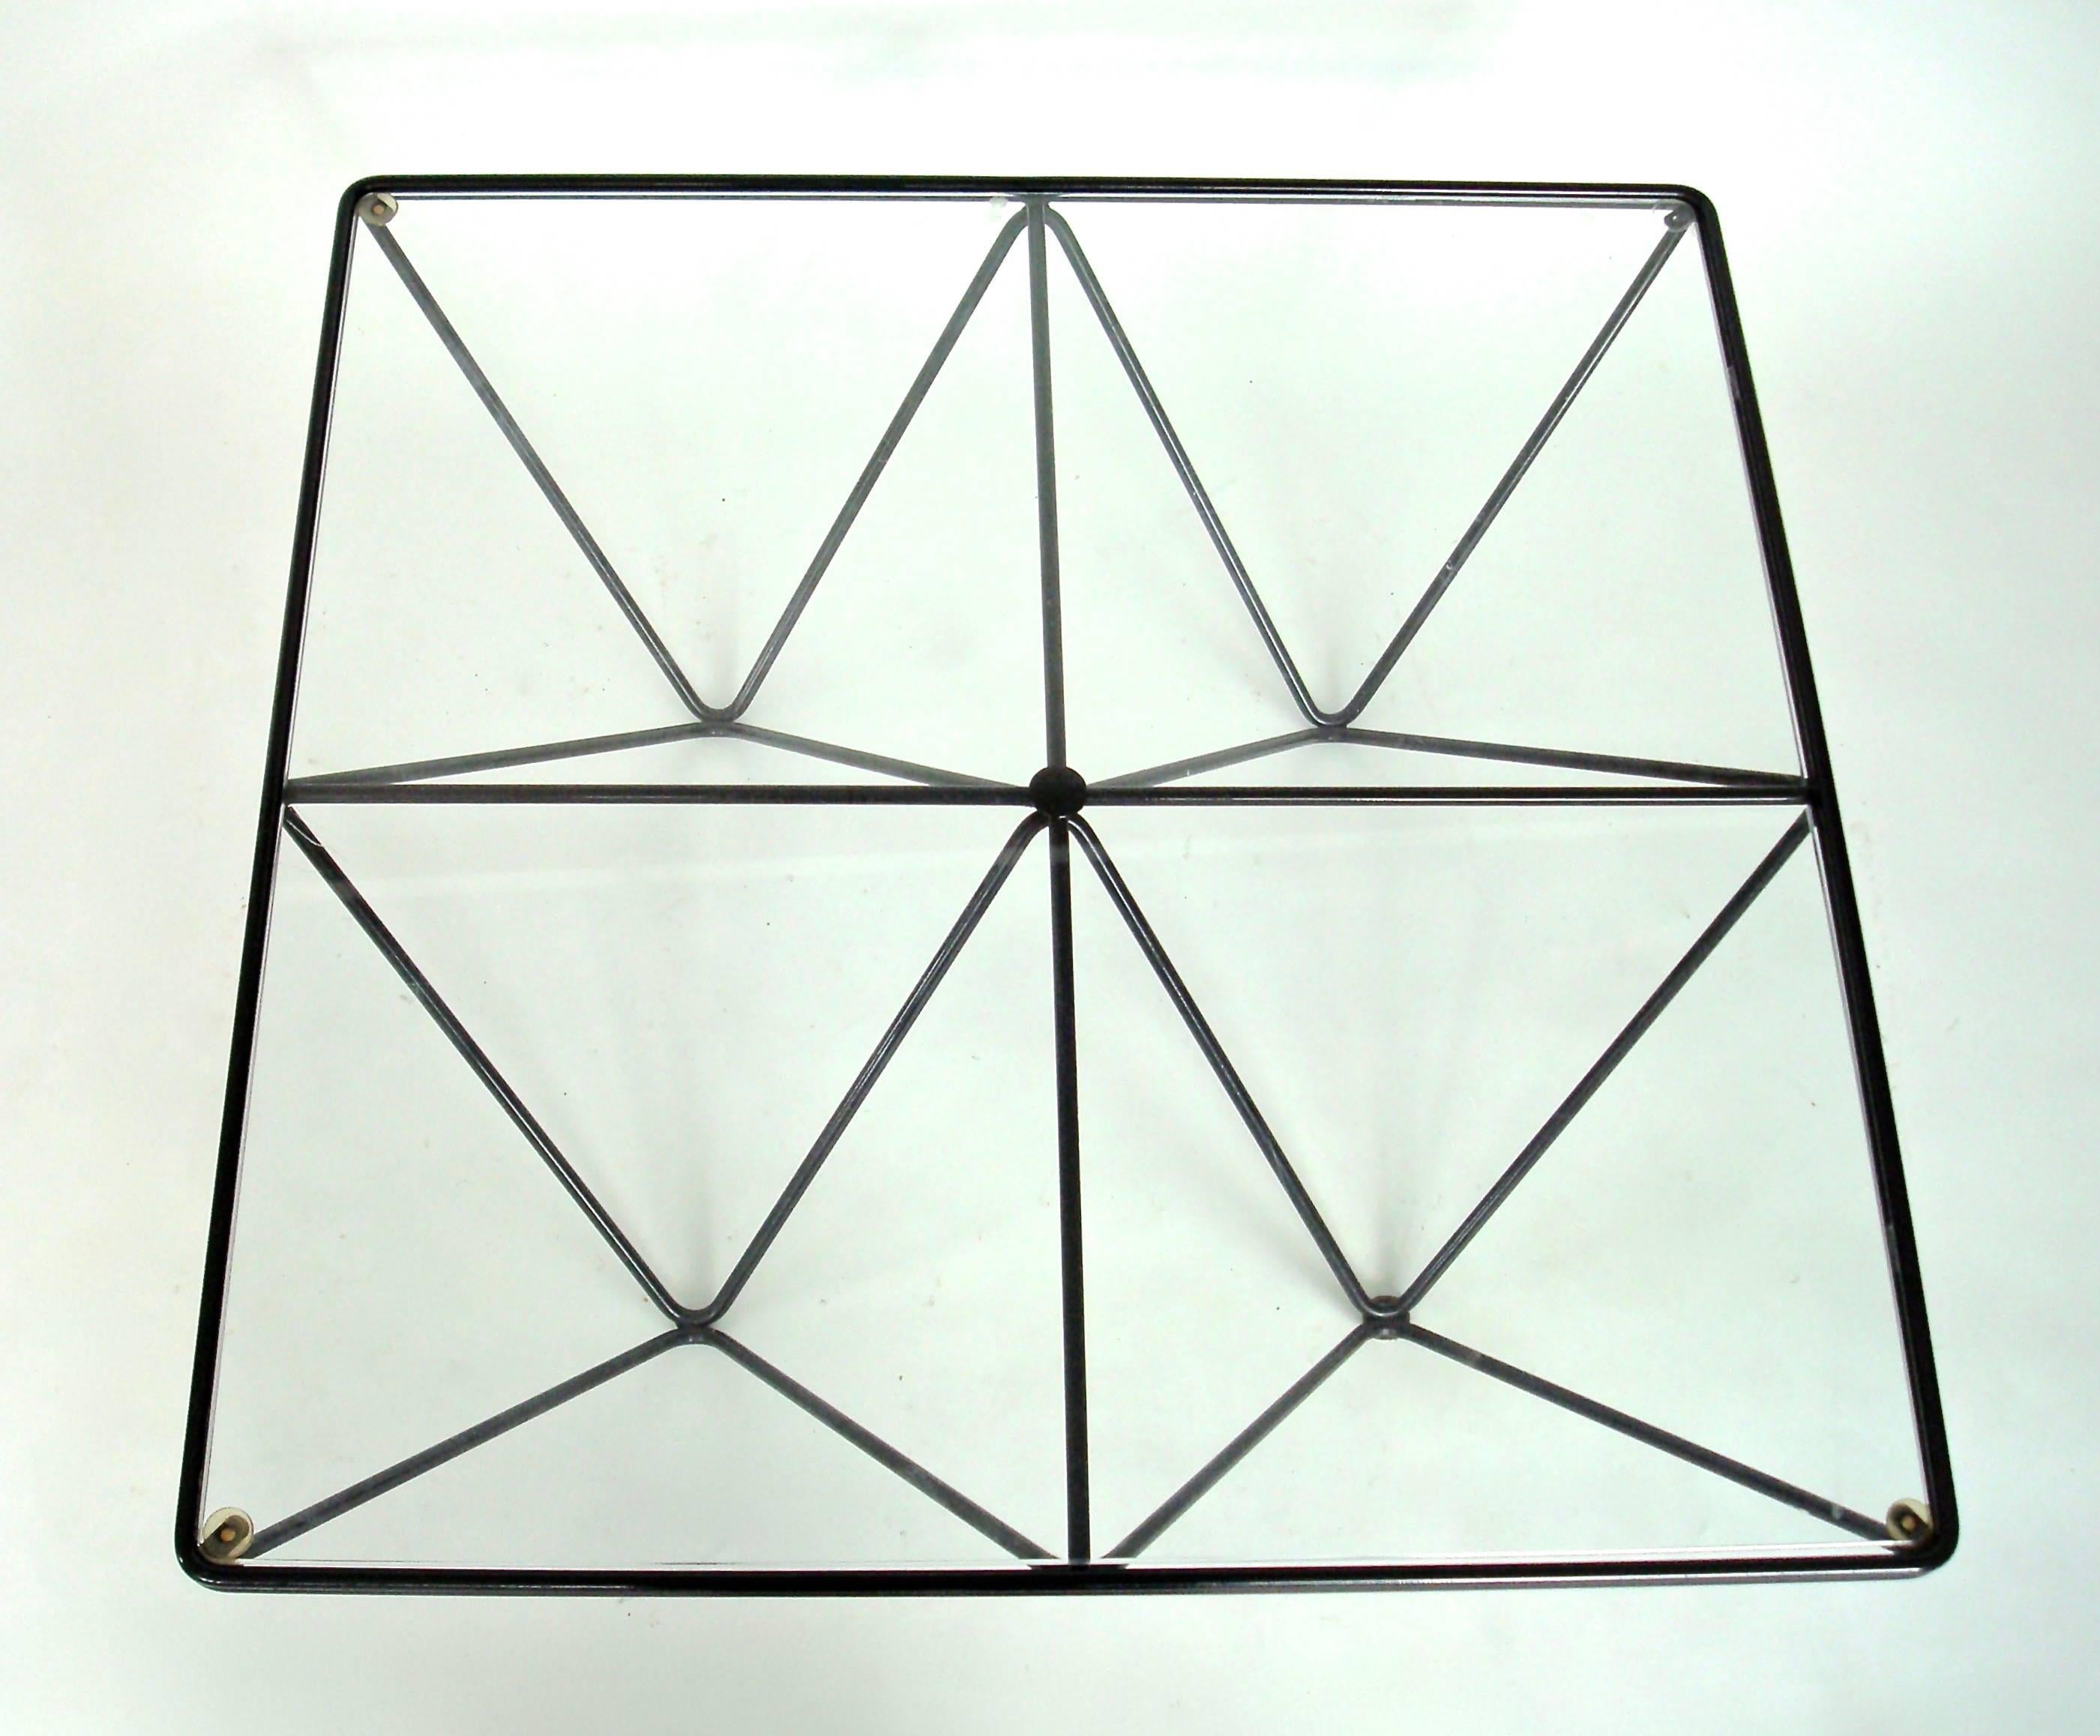 A coffee table in the style of Paolo Piva by B&B Italia, circa 1980.
Welded enameled double steel rods with a glass top. 
Very graphic table with black steel rods and clear glass top. 
Several sizes were designed and produced.
This size can be